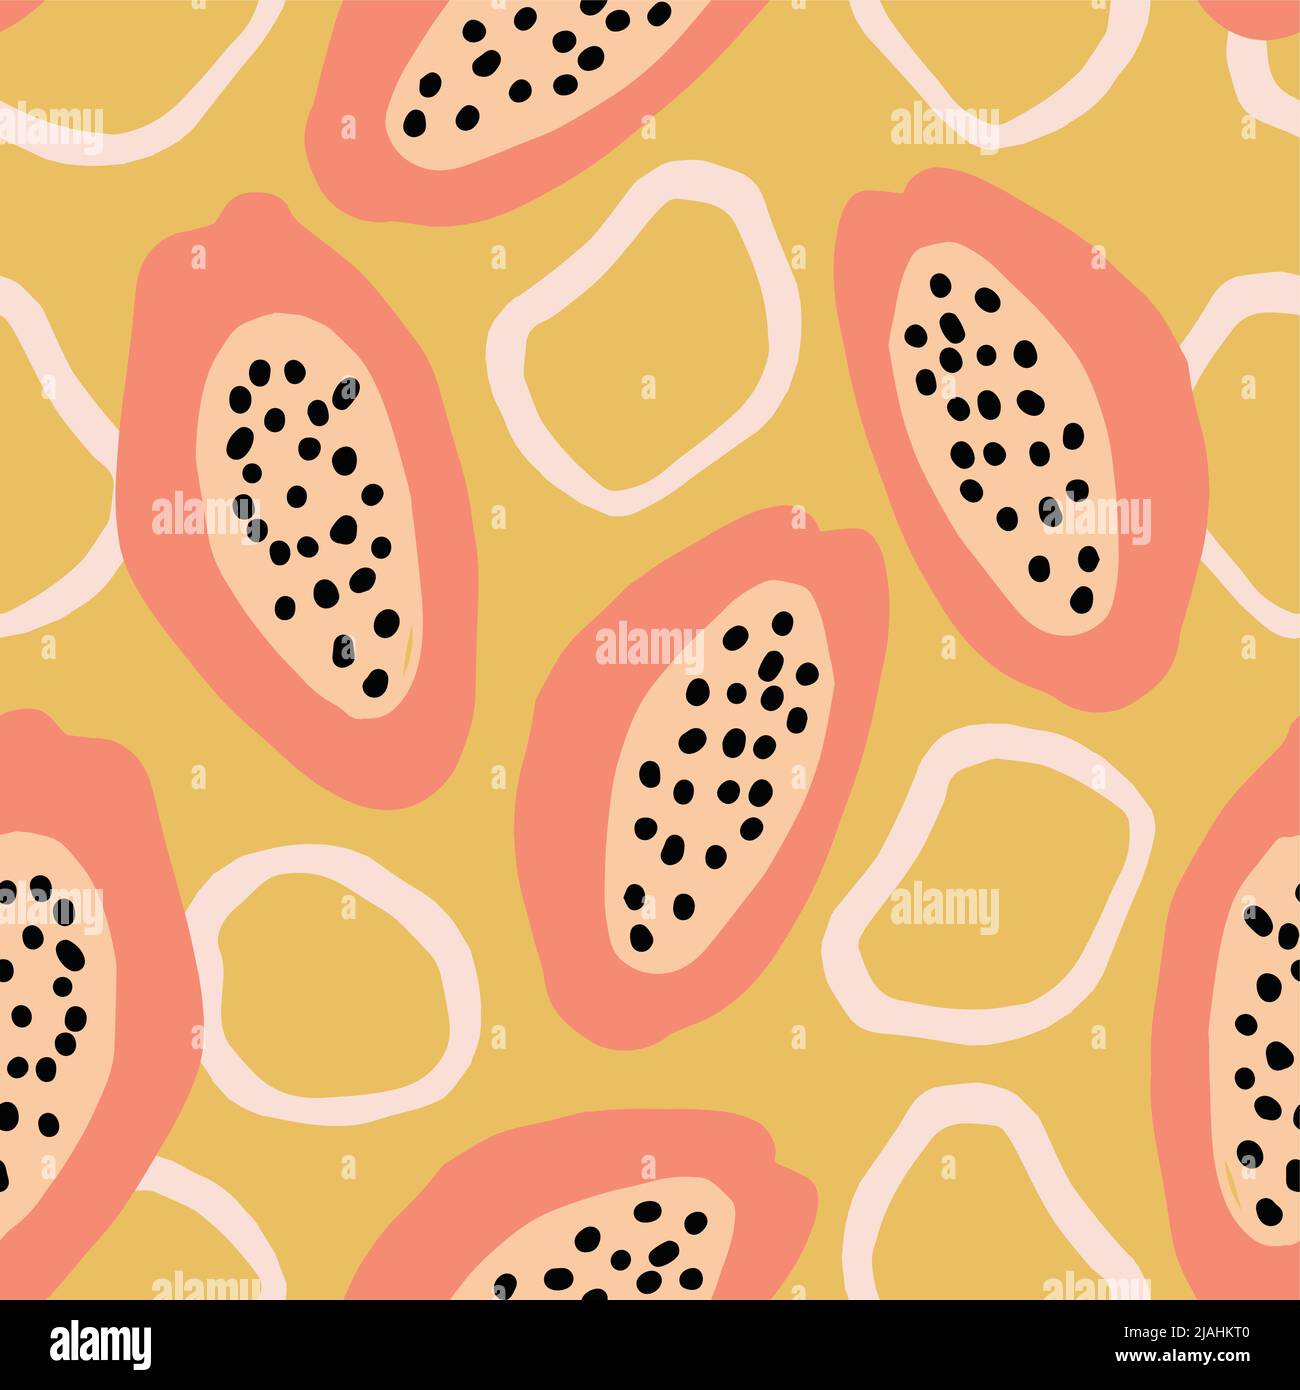 Floral seamless pattern. Sliced papaya fruit and abstract organic circles, round shapes.and Yellow background. Summer textile, fabric food design Stock Vector